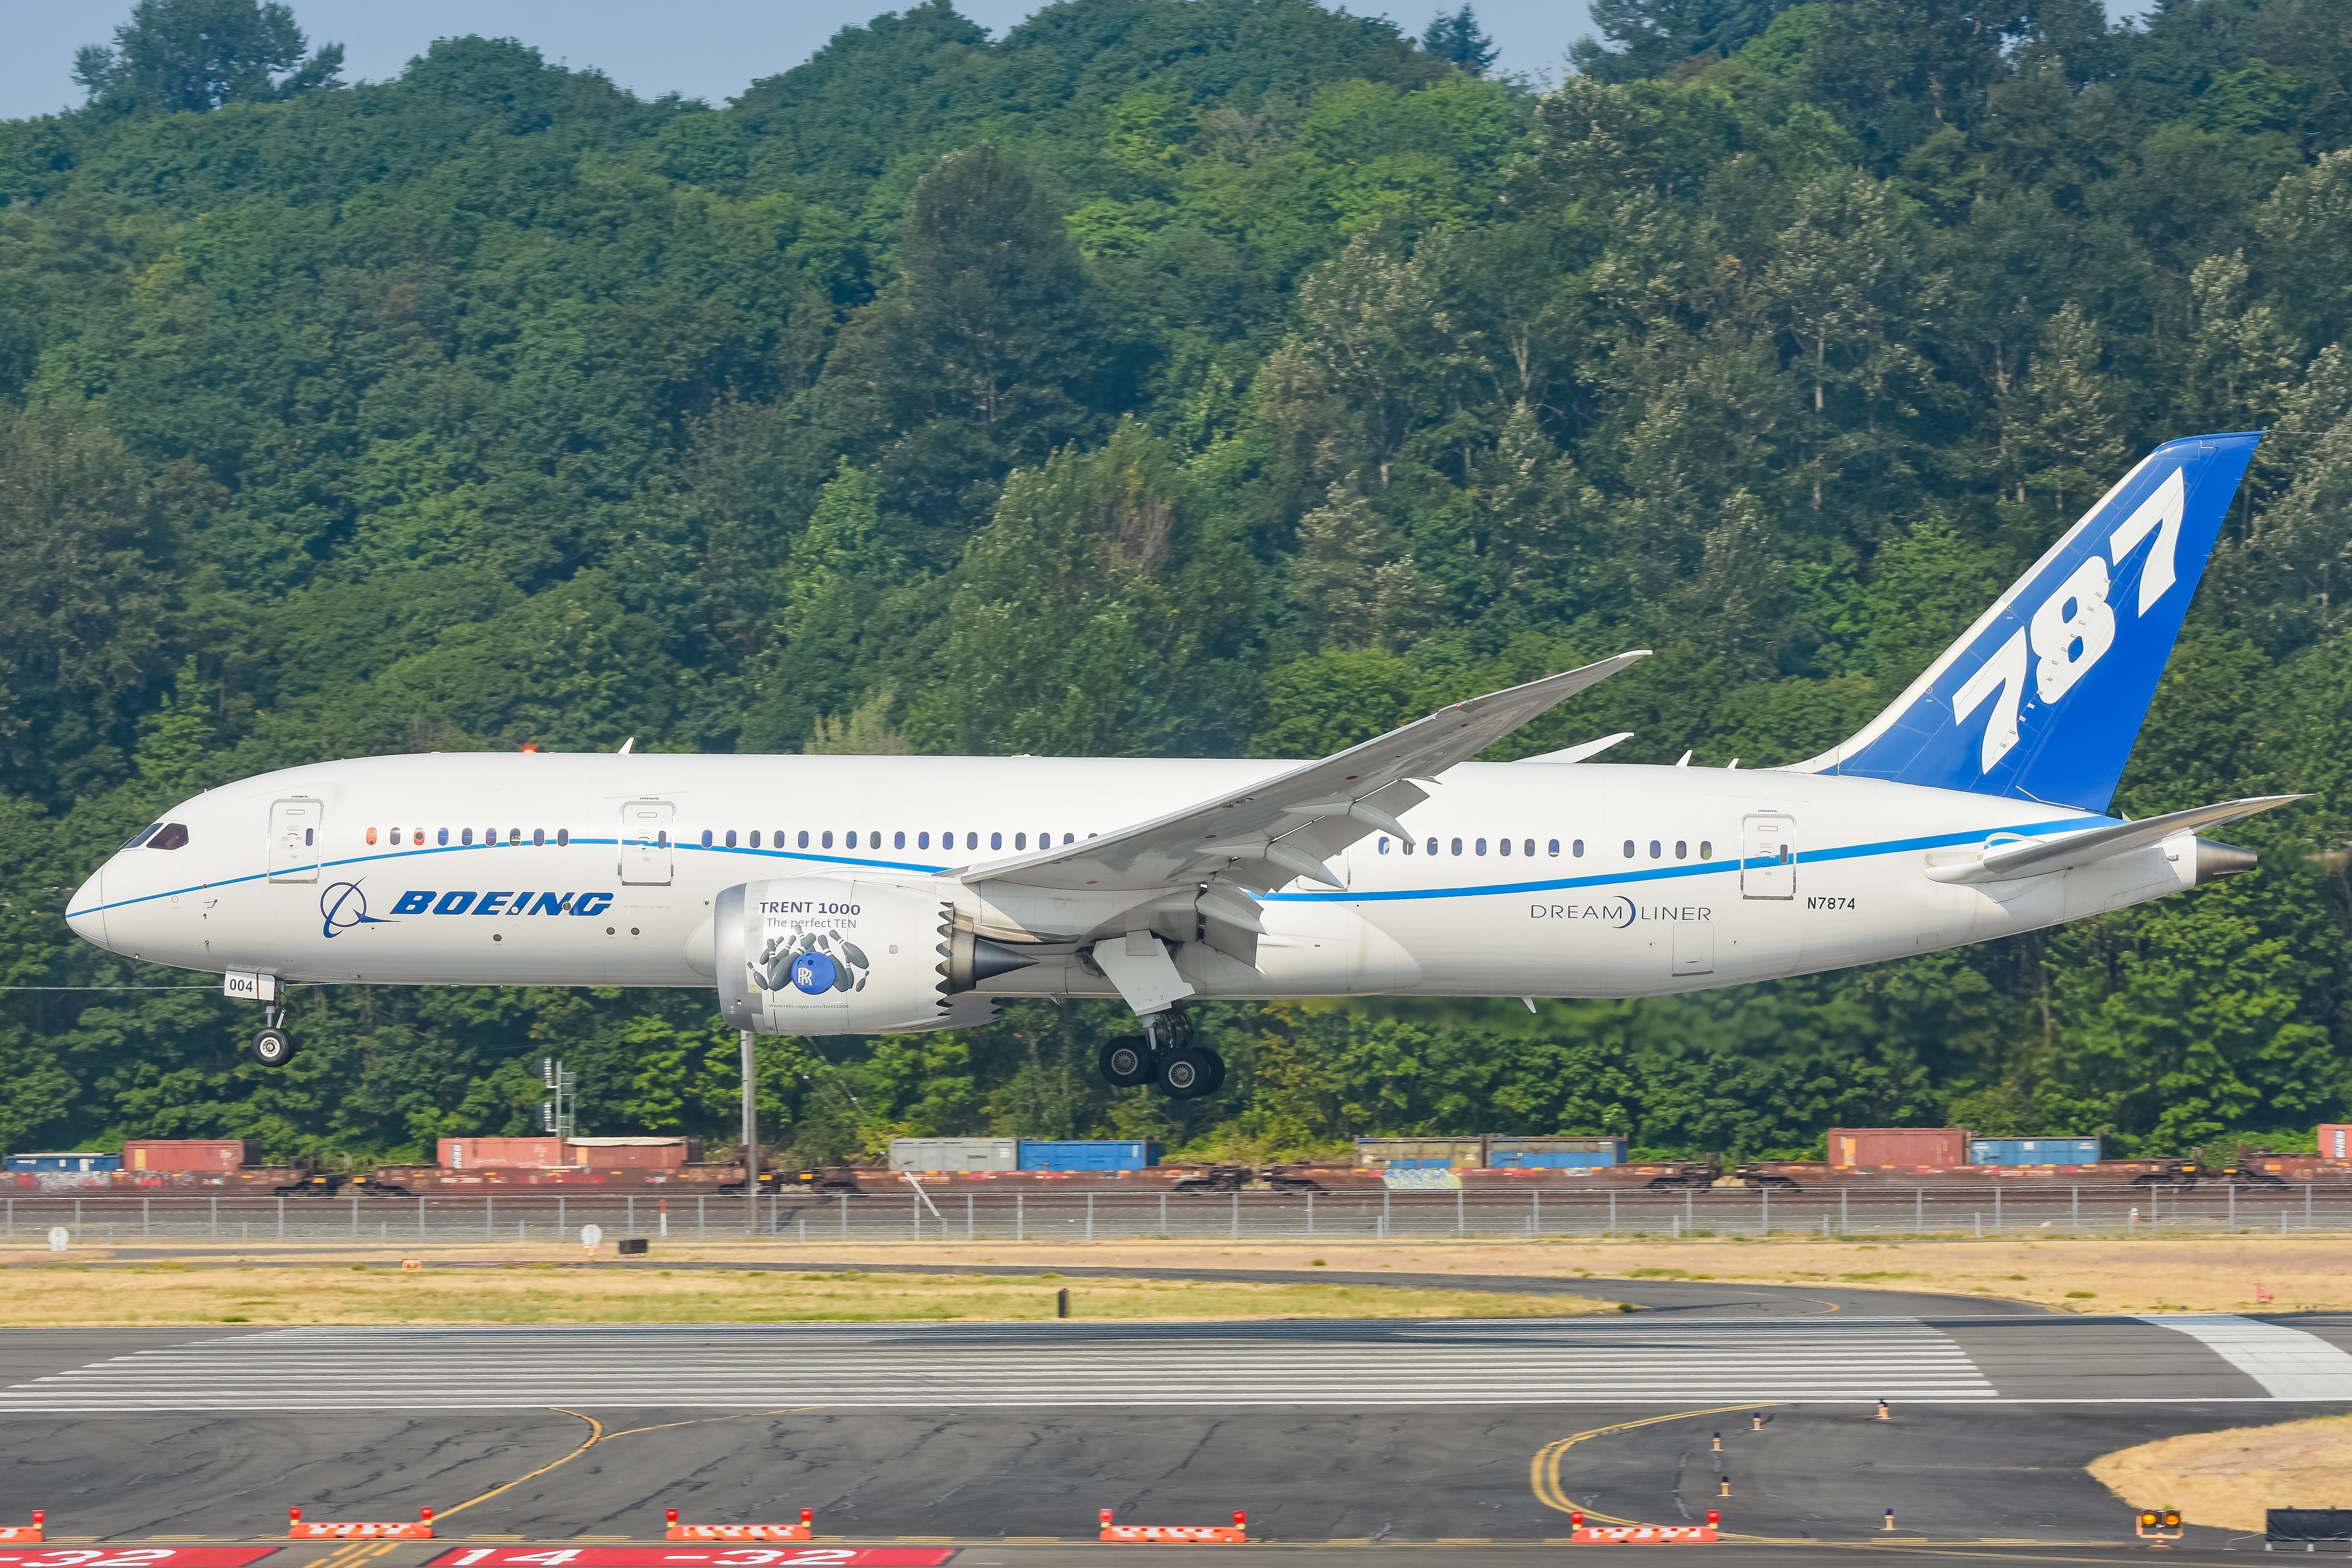 A Boeing 787 Dreamliner in house livery about to land on a runway.